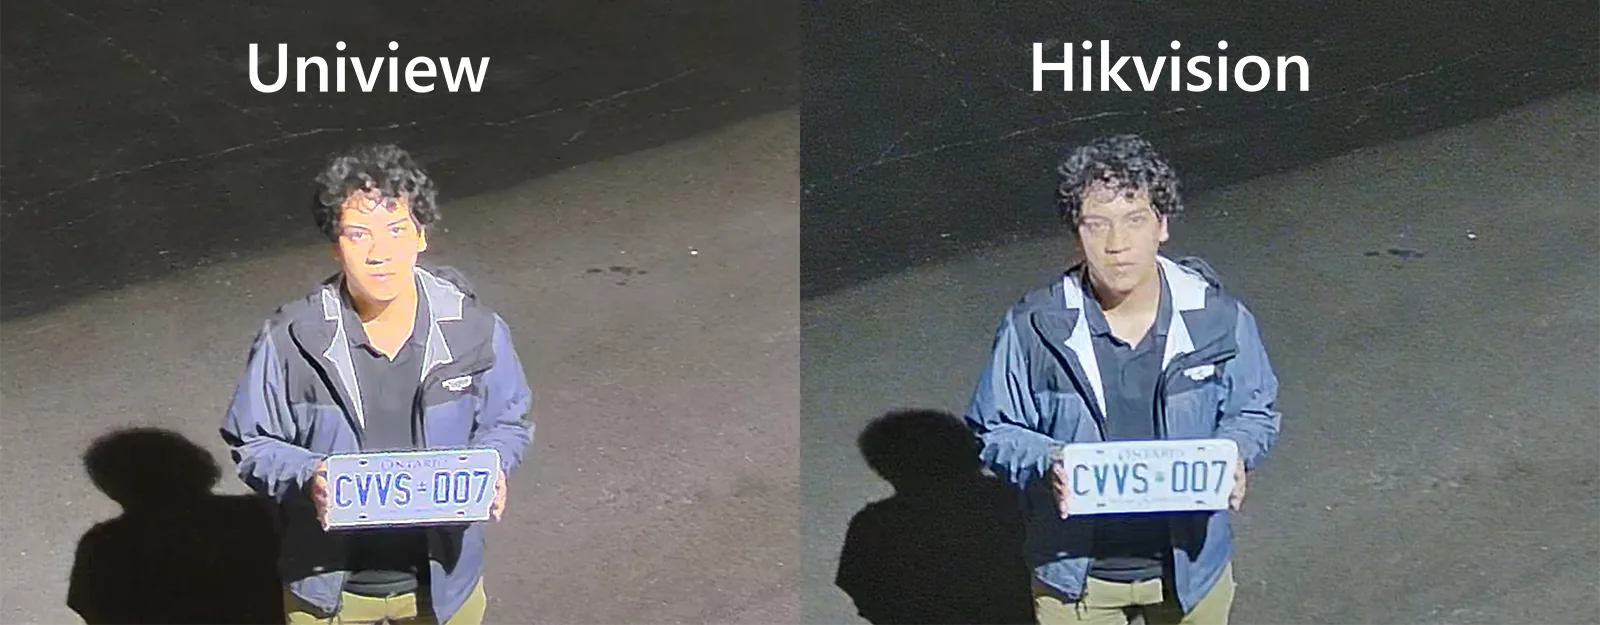 Two images side-by-side of a person in a grey jacket holding a license plate standing on a road at night